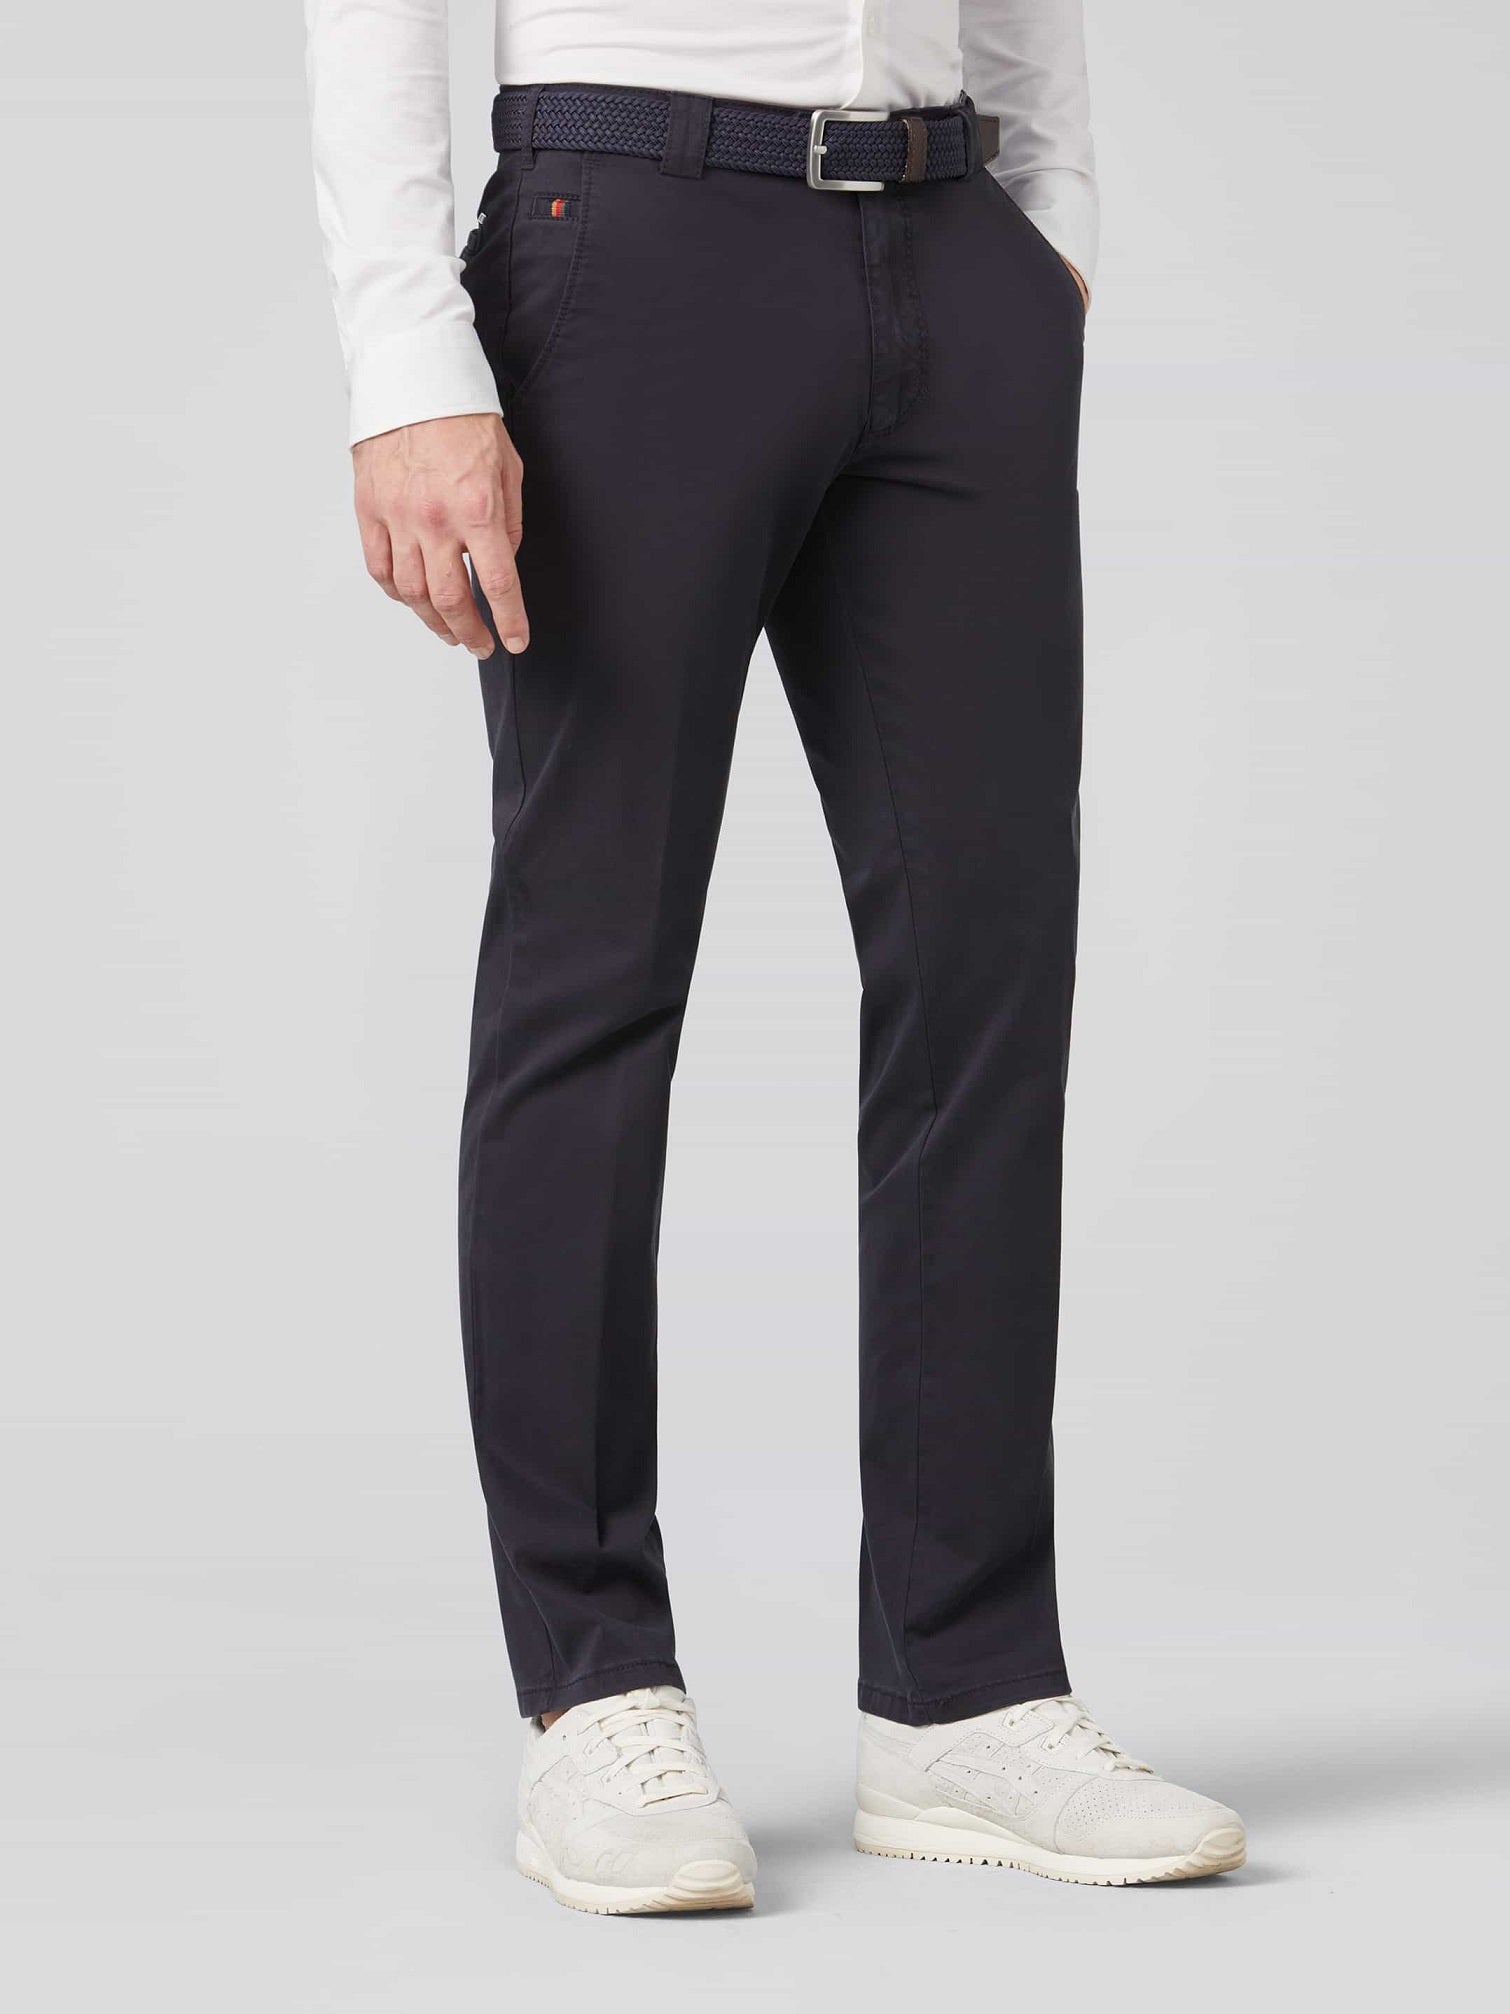 MEYER Trousers - Roma 3001 Light-Weight Cotton Chinos - Navy